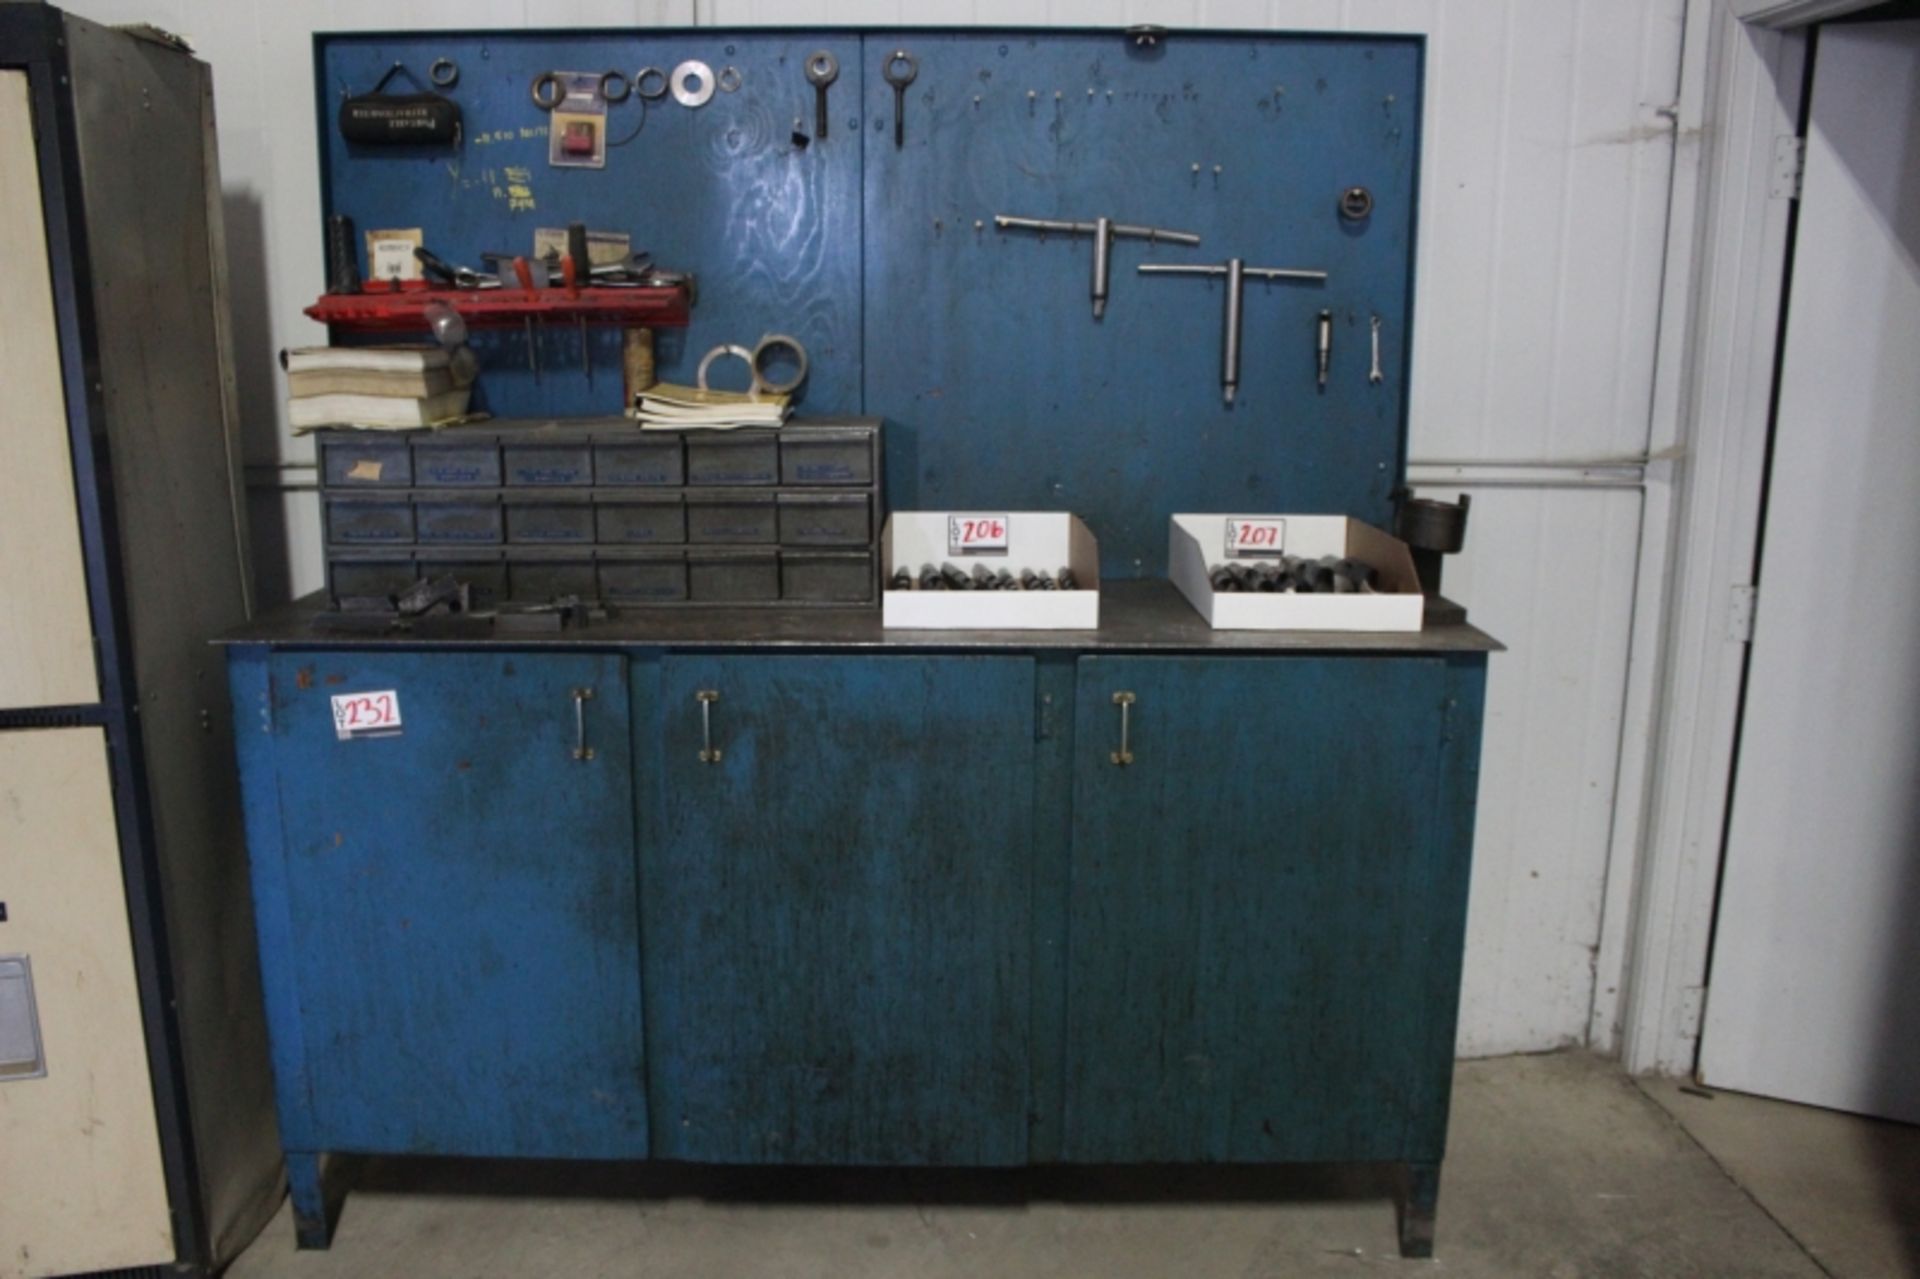 Work Bench with Content, Assorted Drills, Taps, Sleeves Magnets, & Hardware